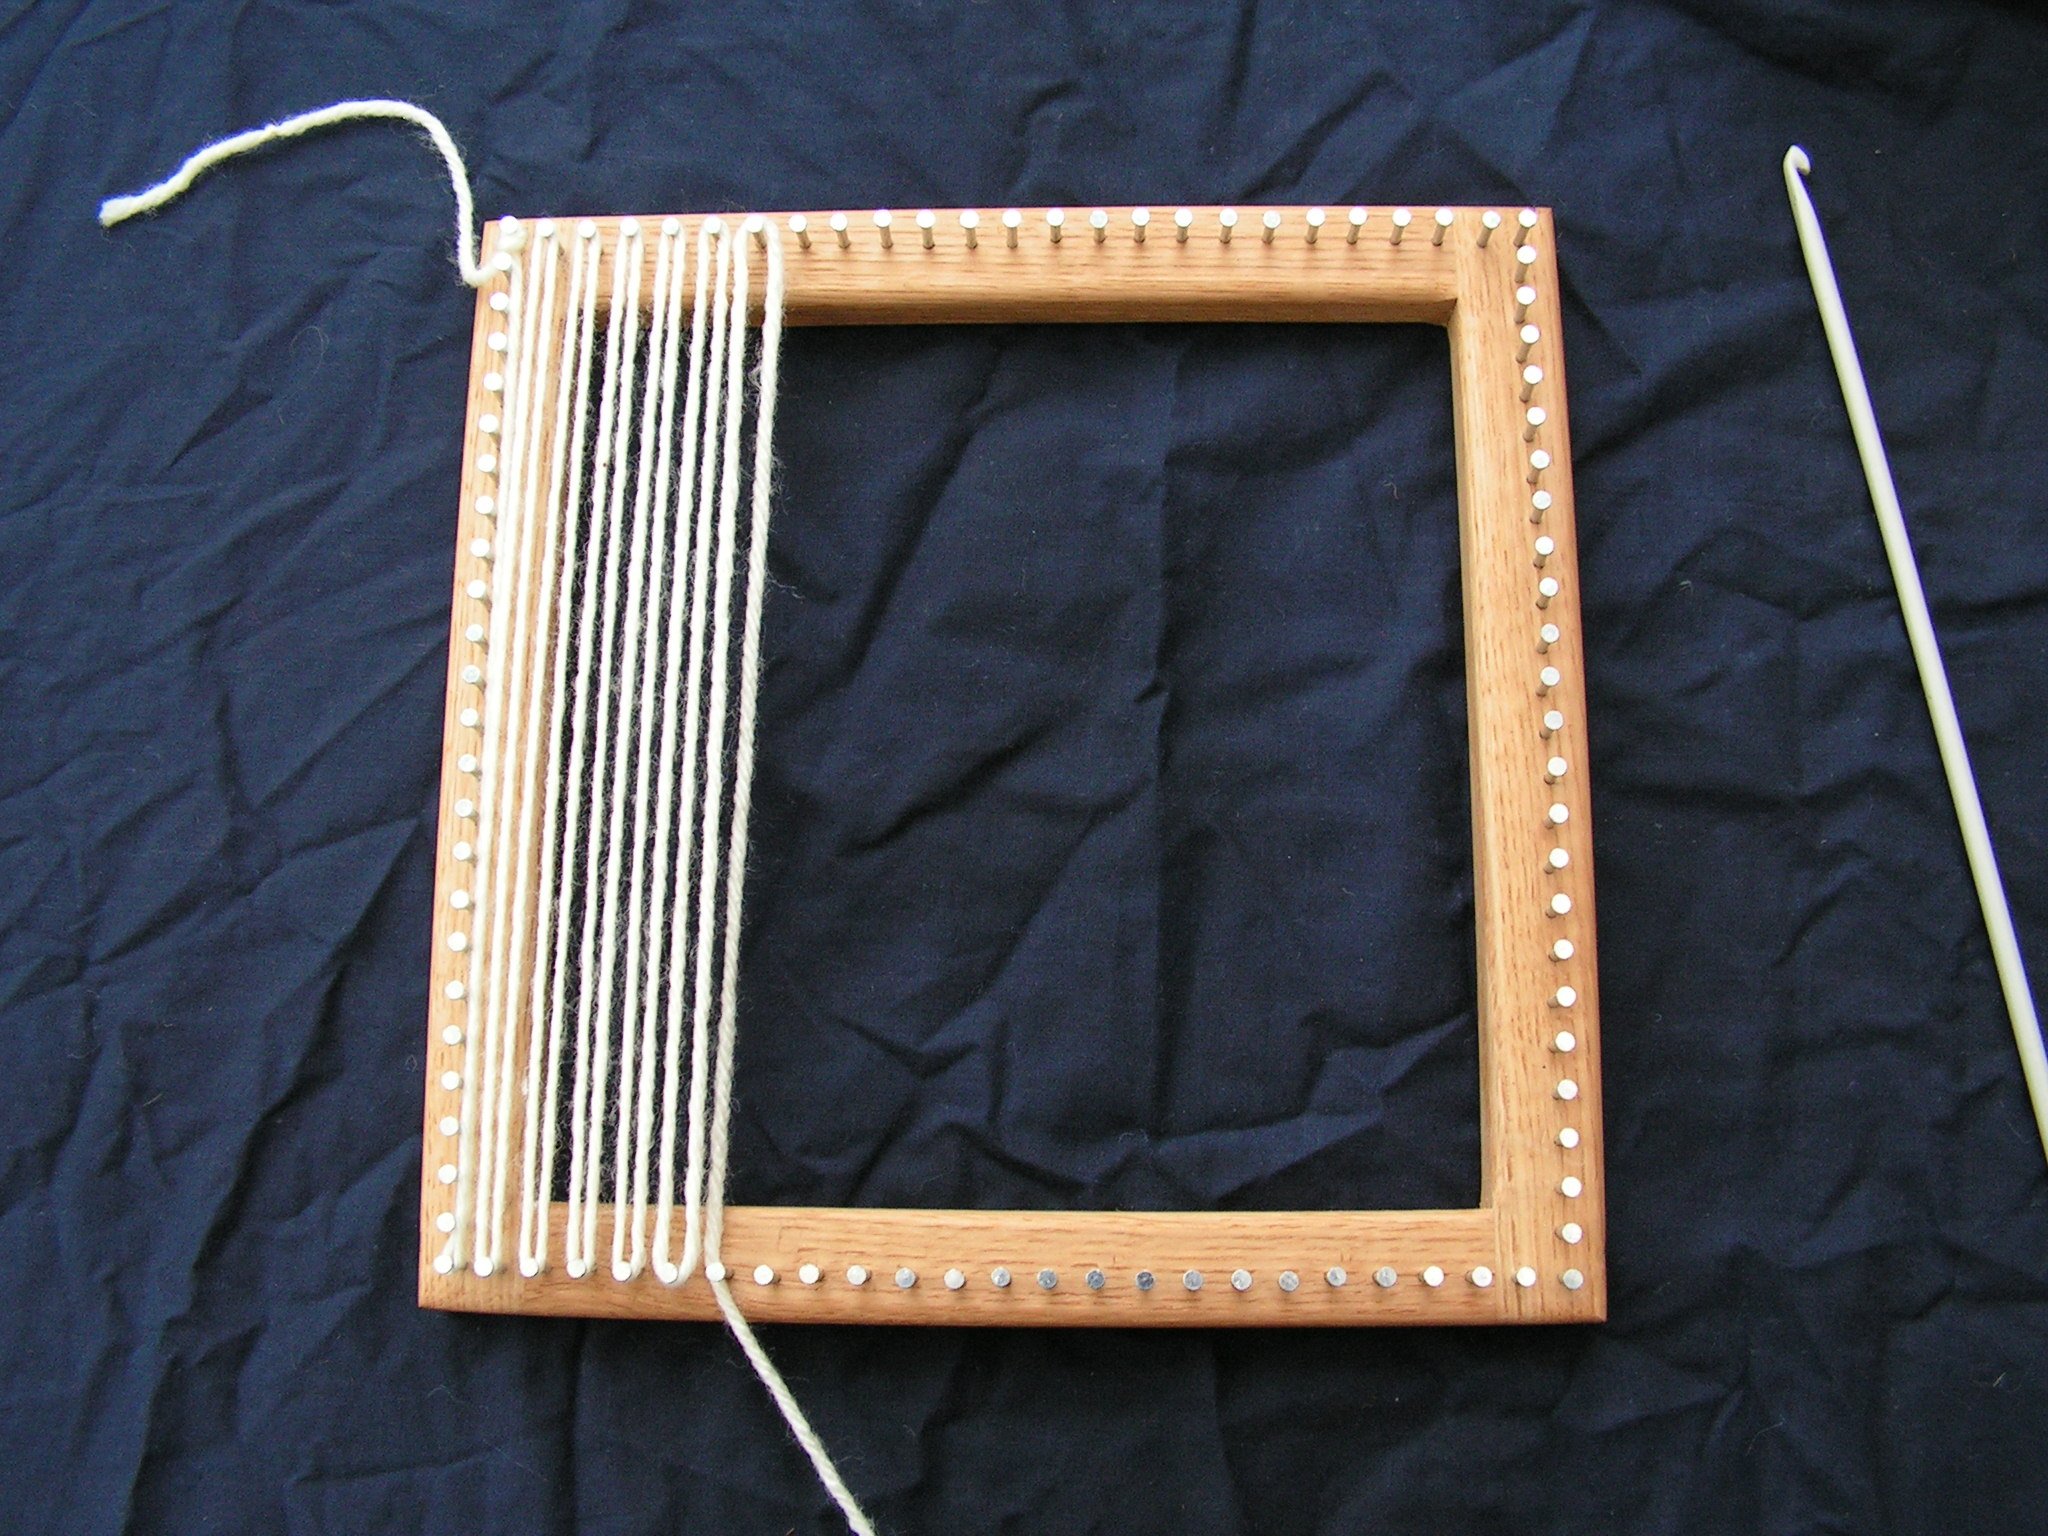 How to Use a Frame to Make a Pin Loom